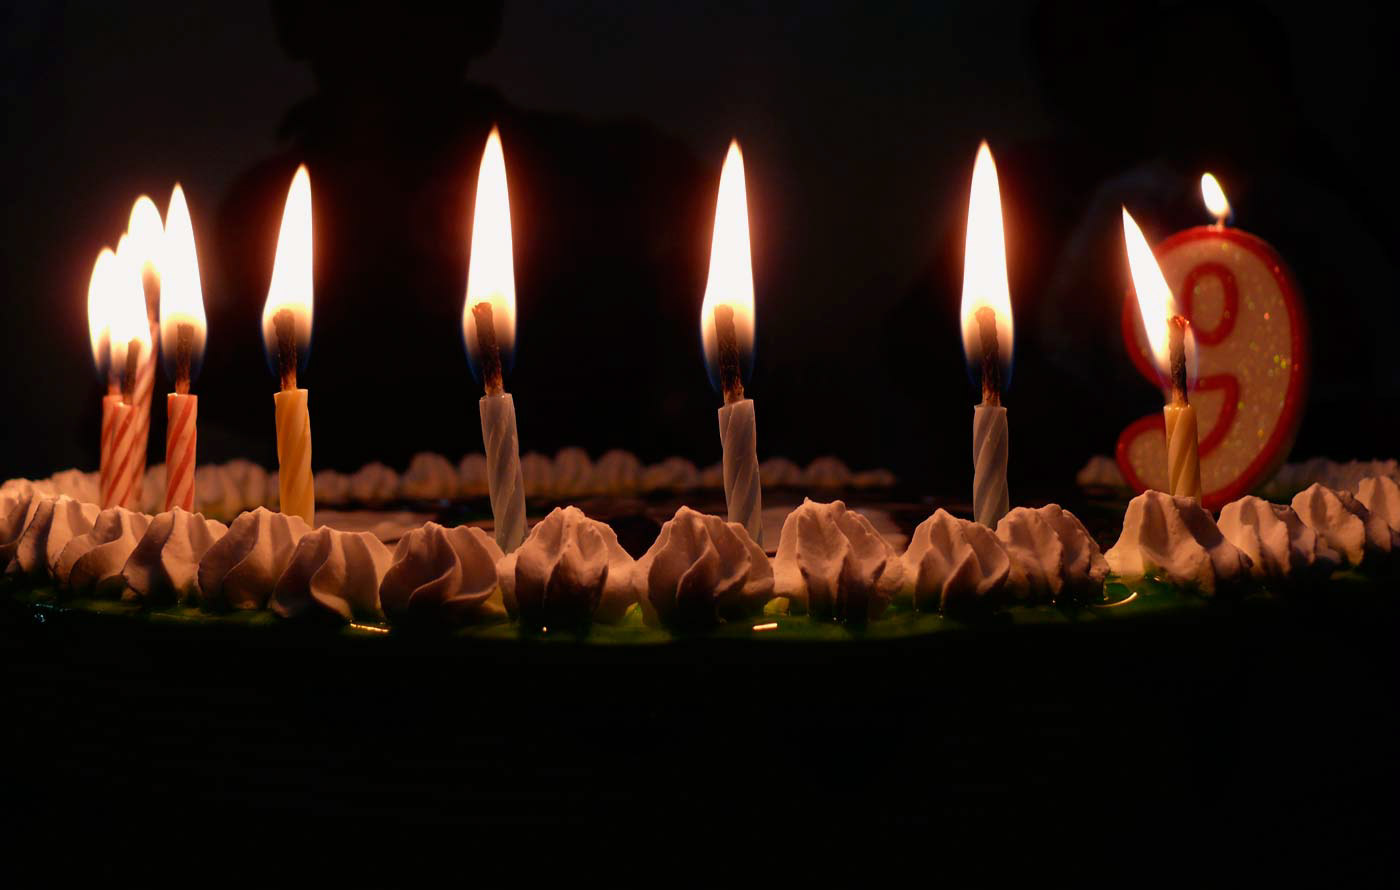 Candles on the birthday cake